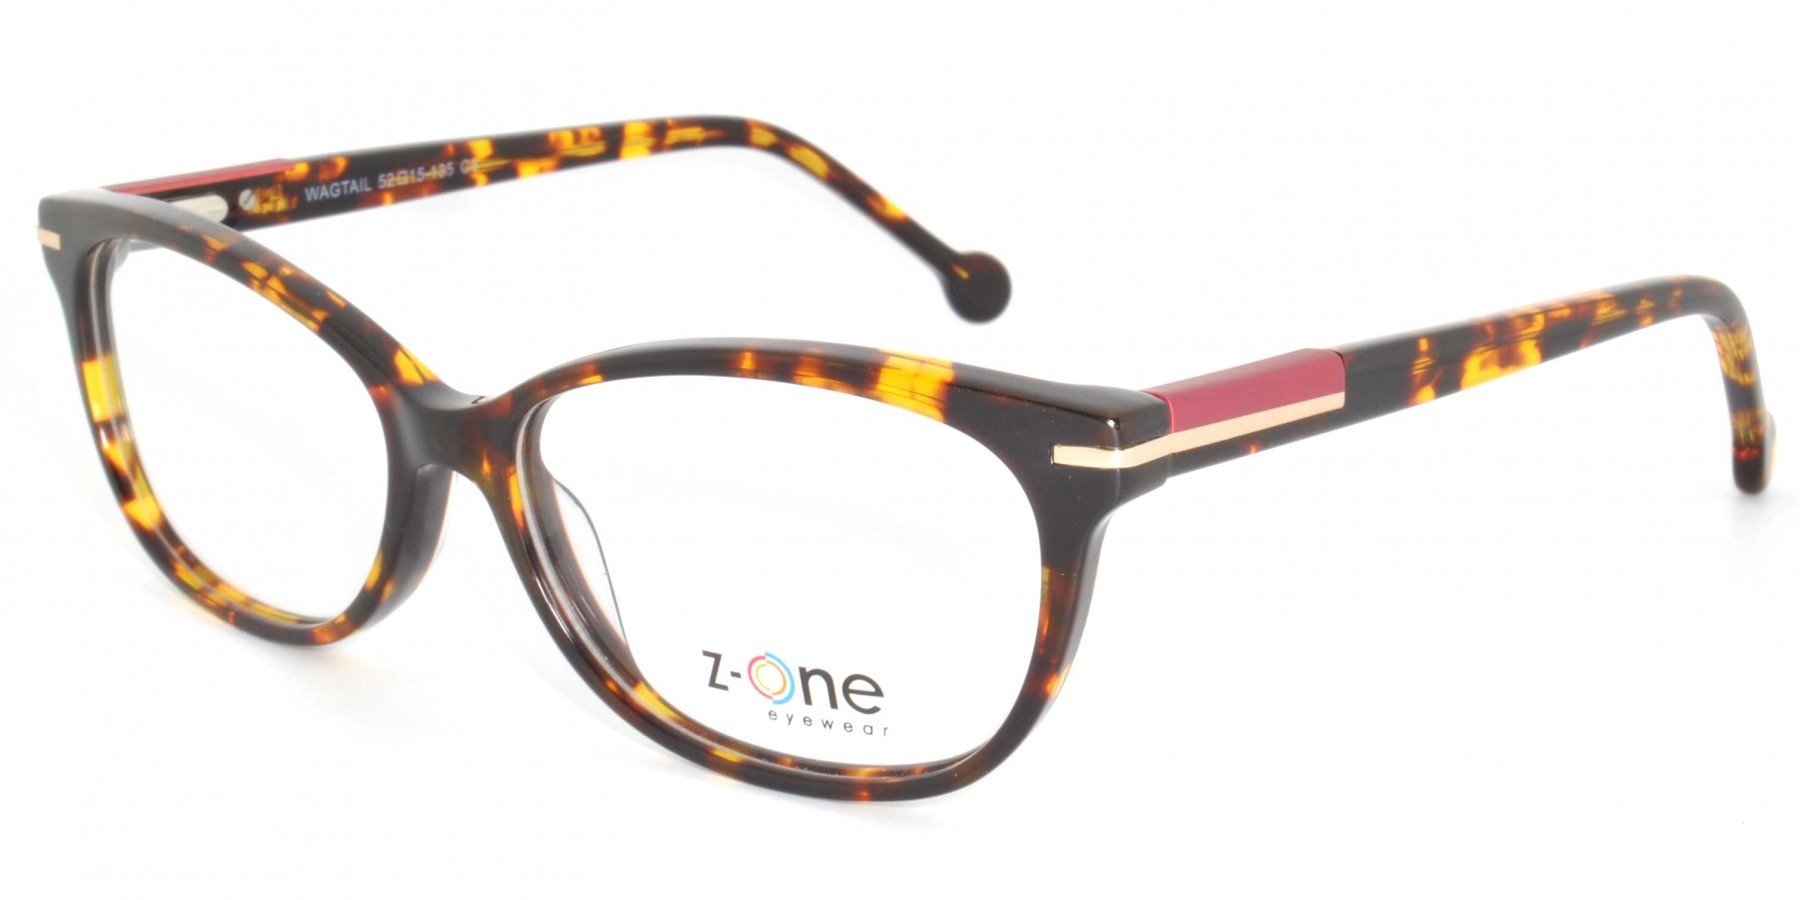 Z-One Wagtail Prescription Glasses